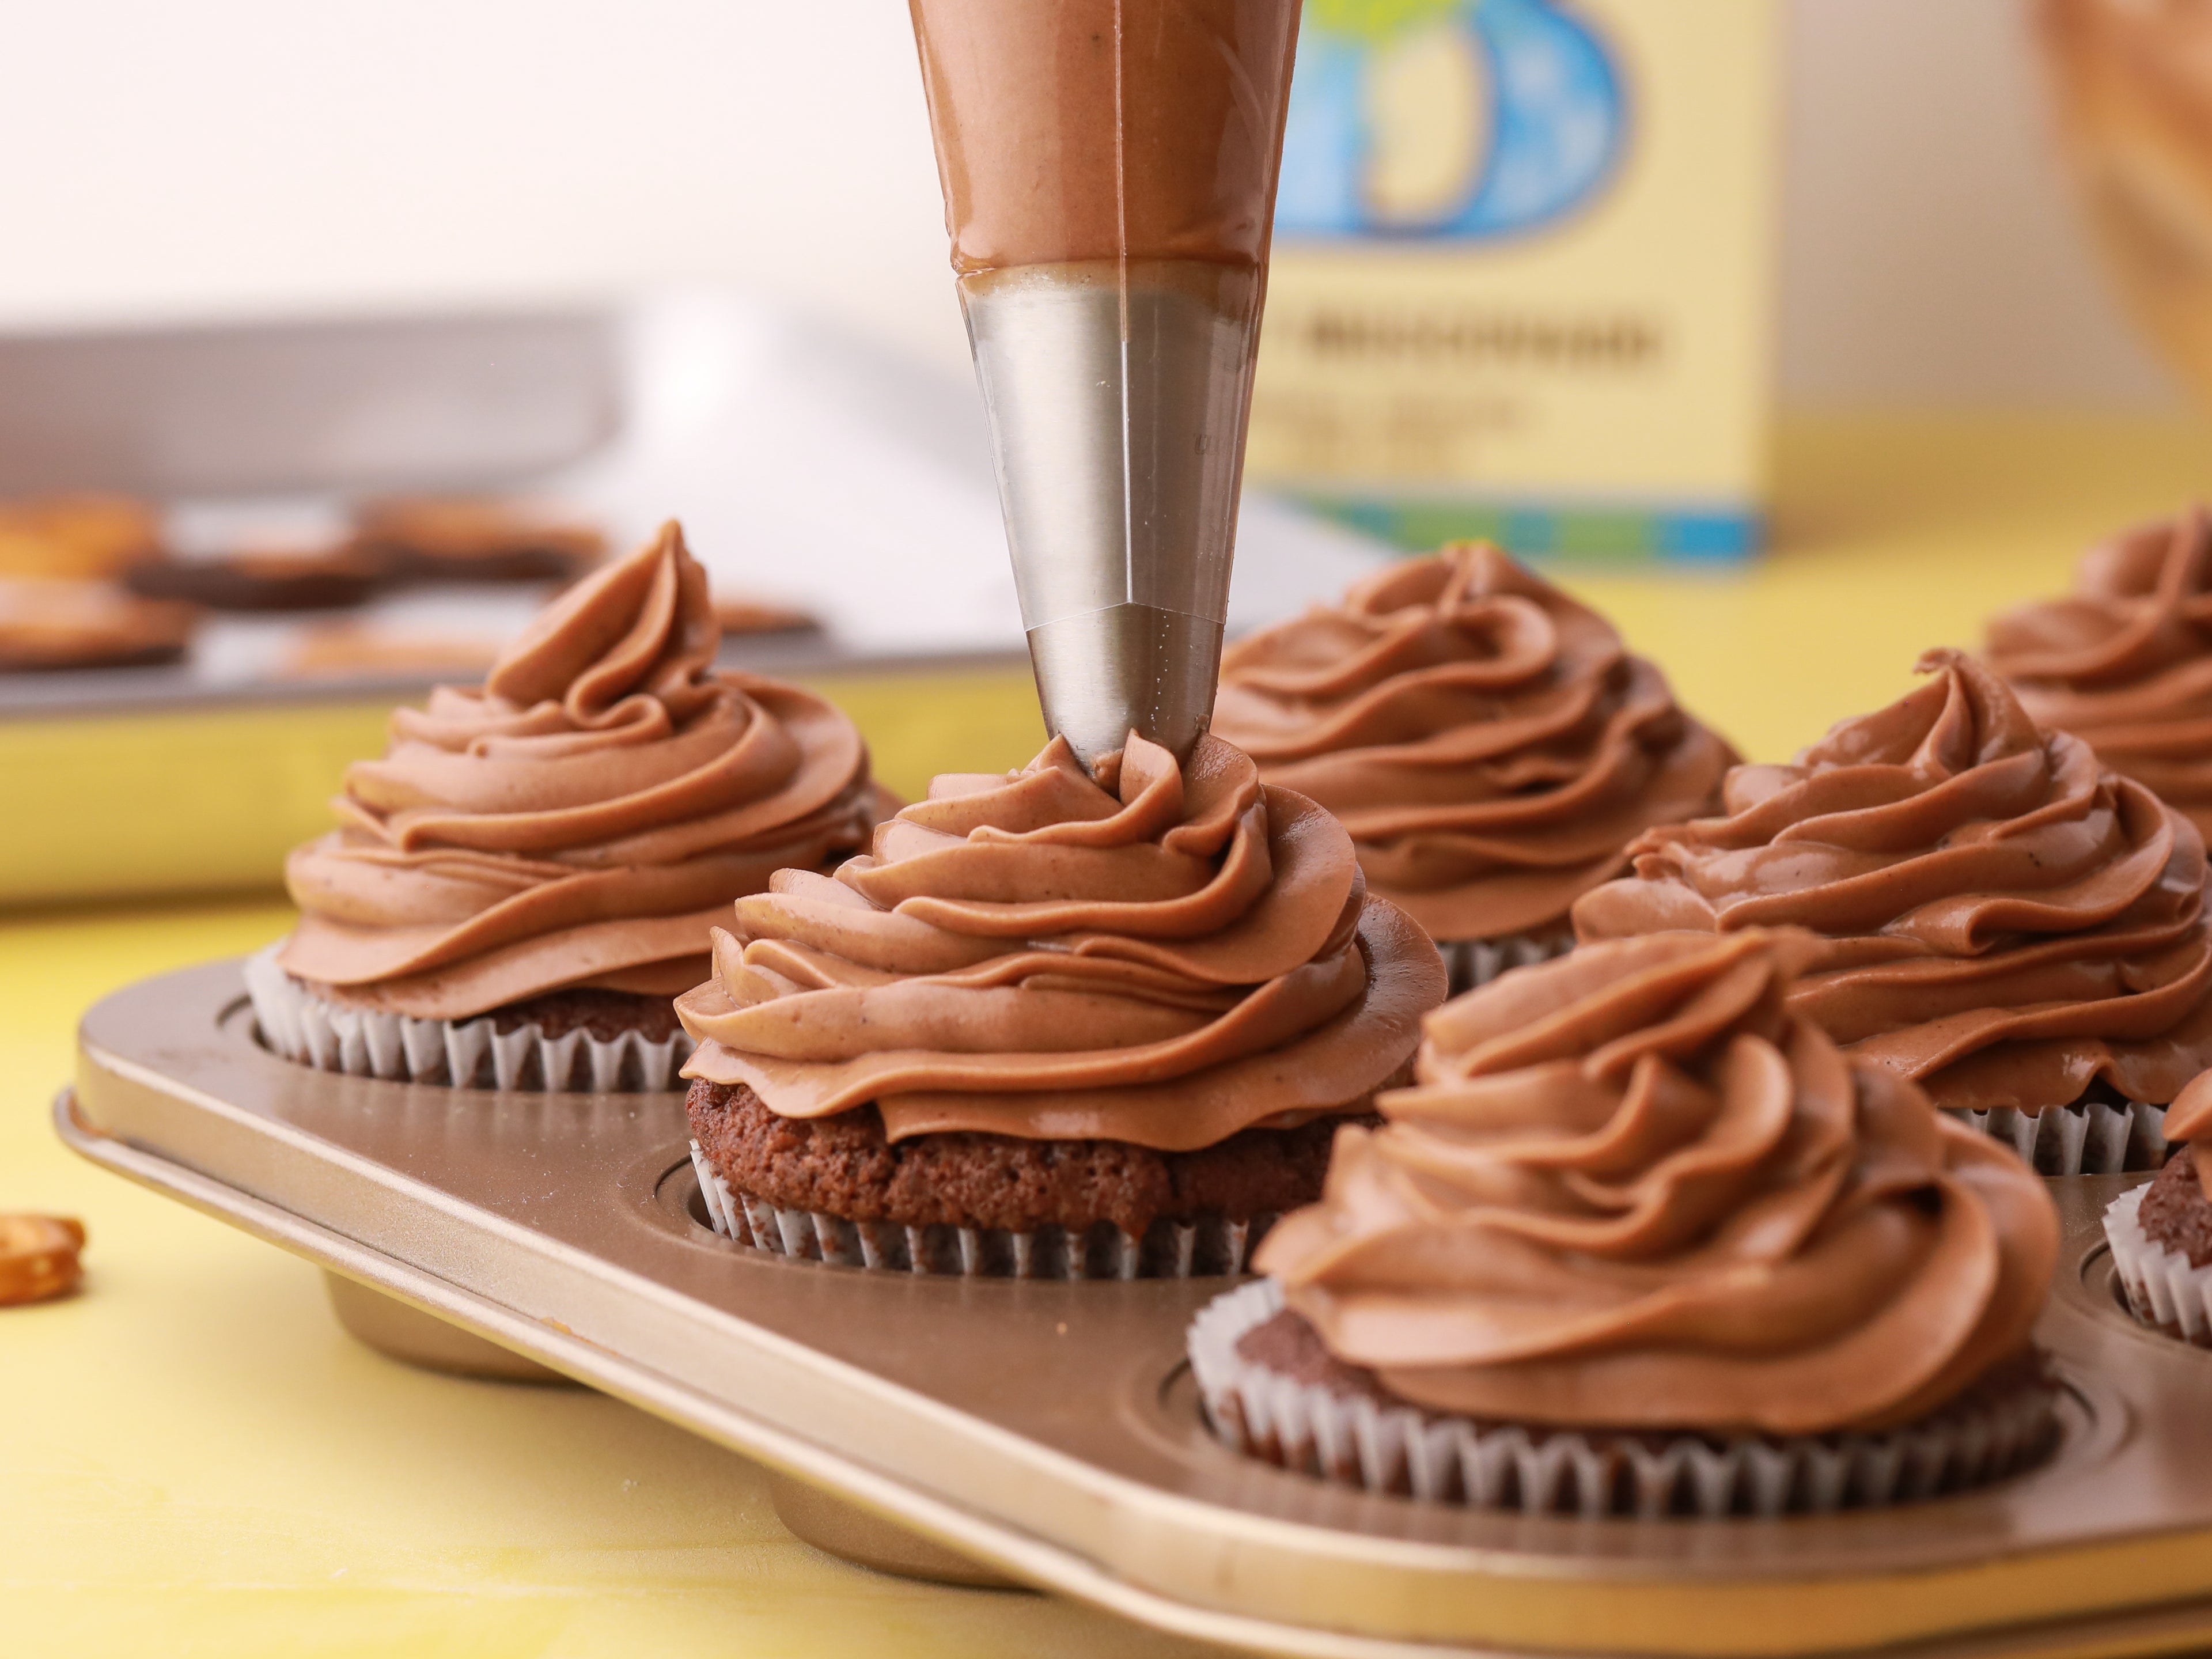 Chocolate buttercream being piped onto cupcake